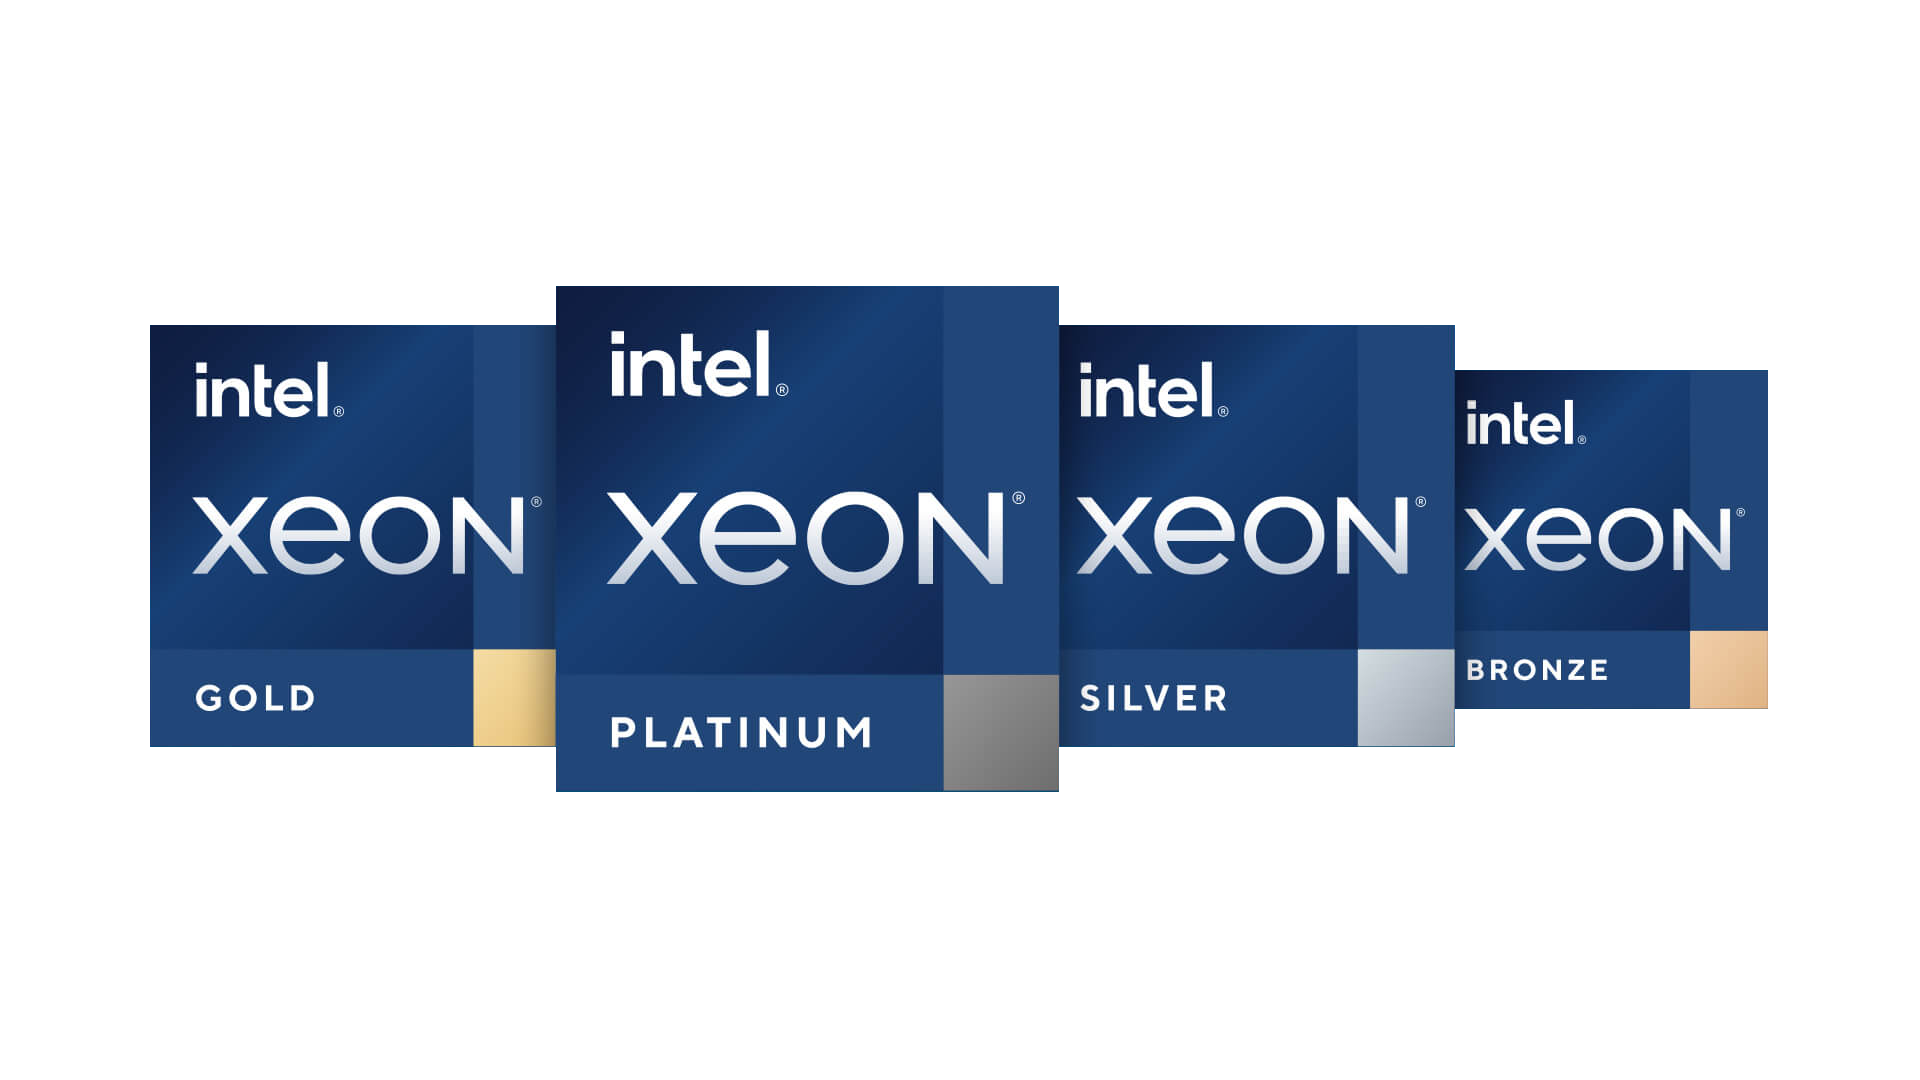 All levels of Intel Xeon scalable processor family